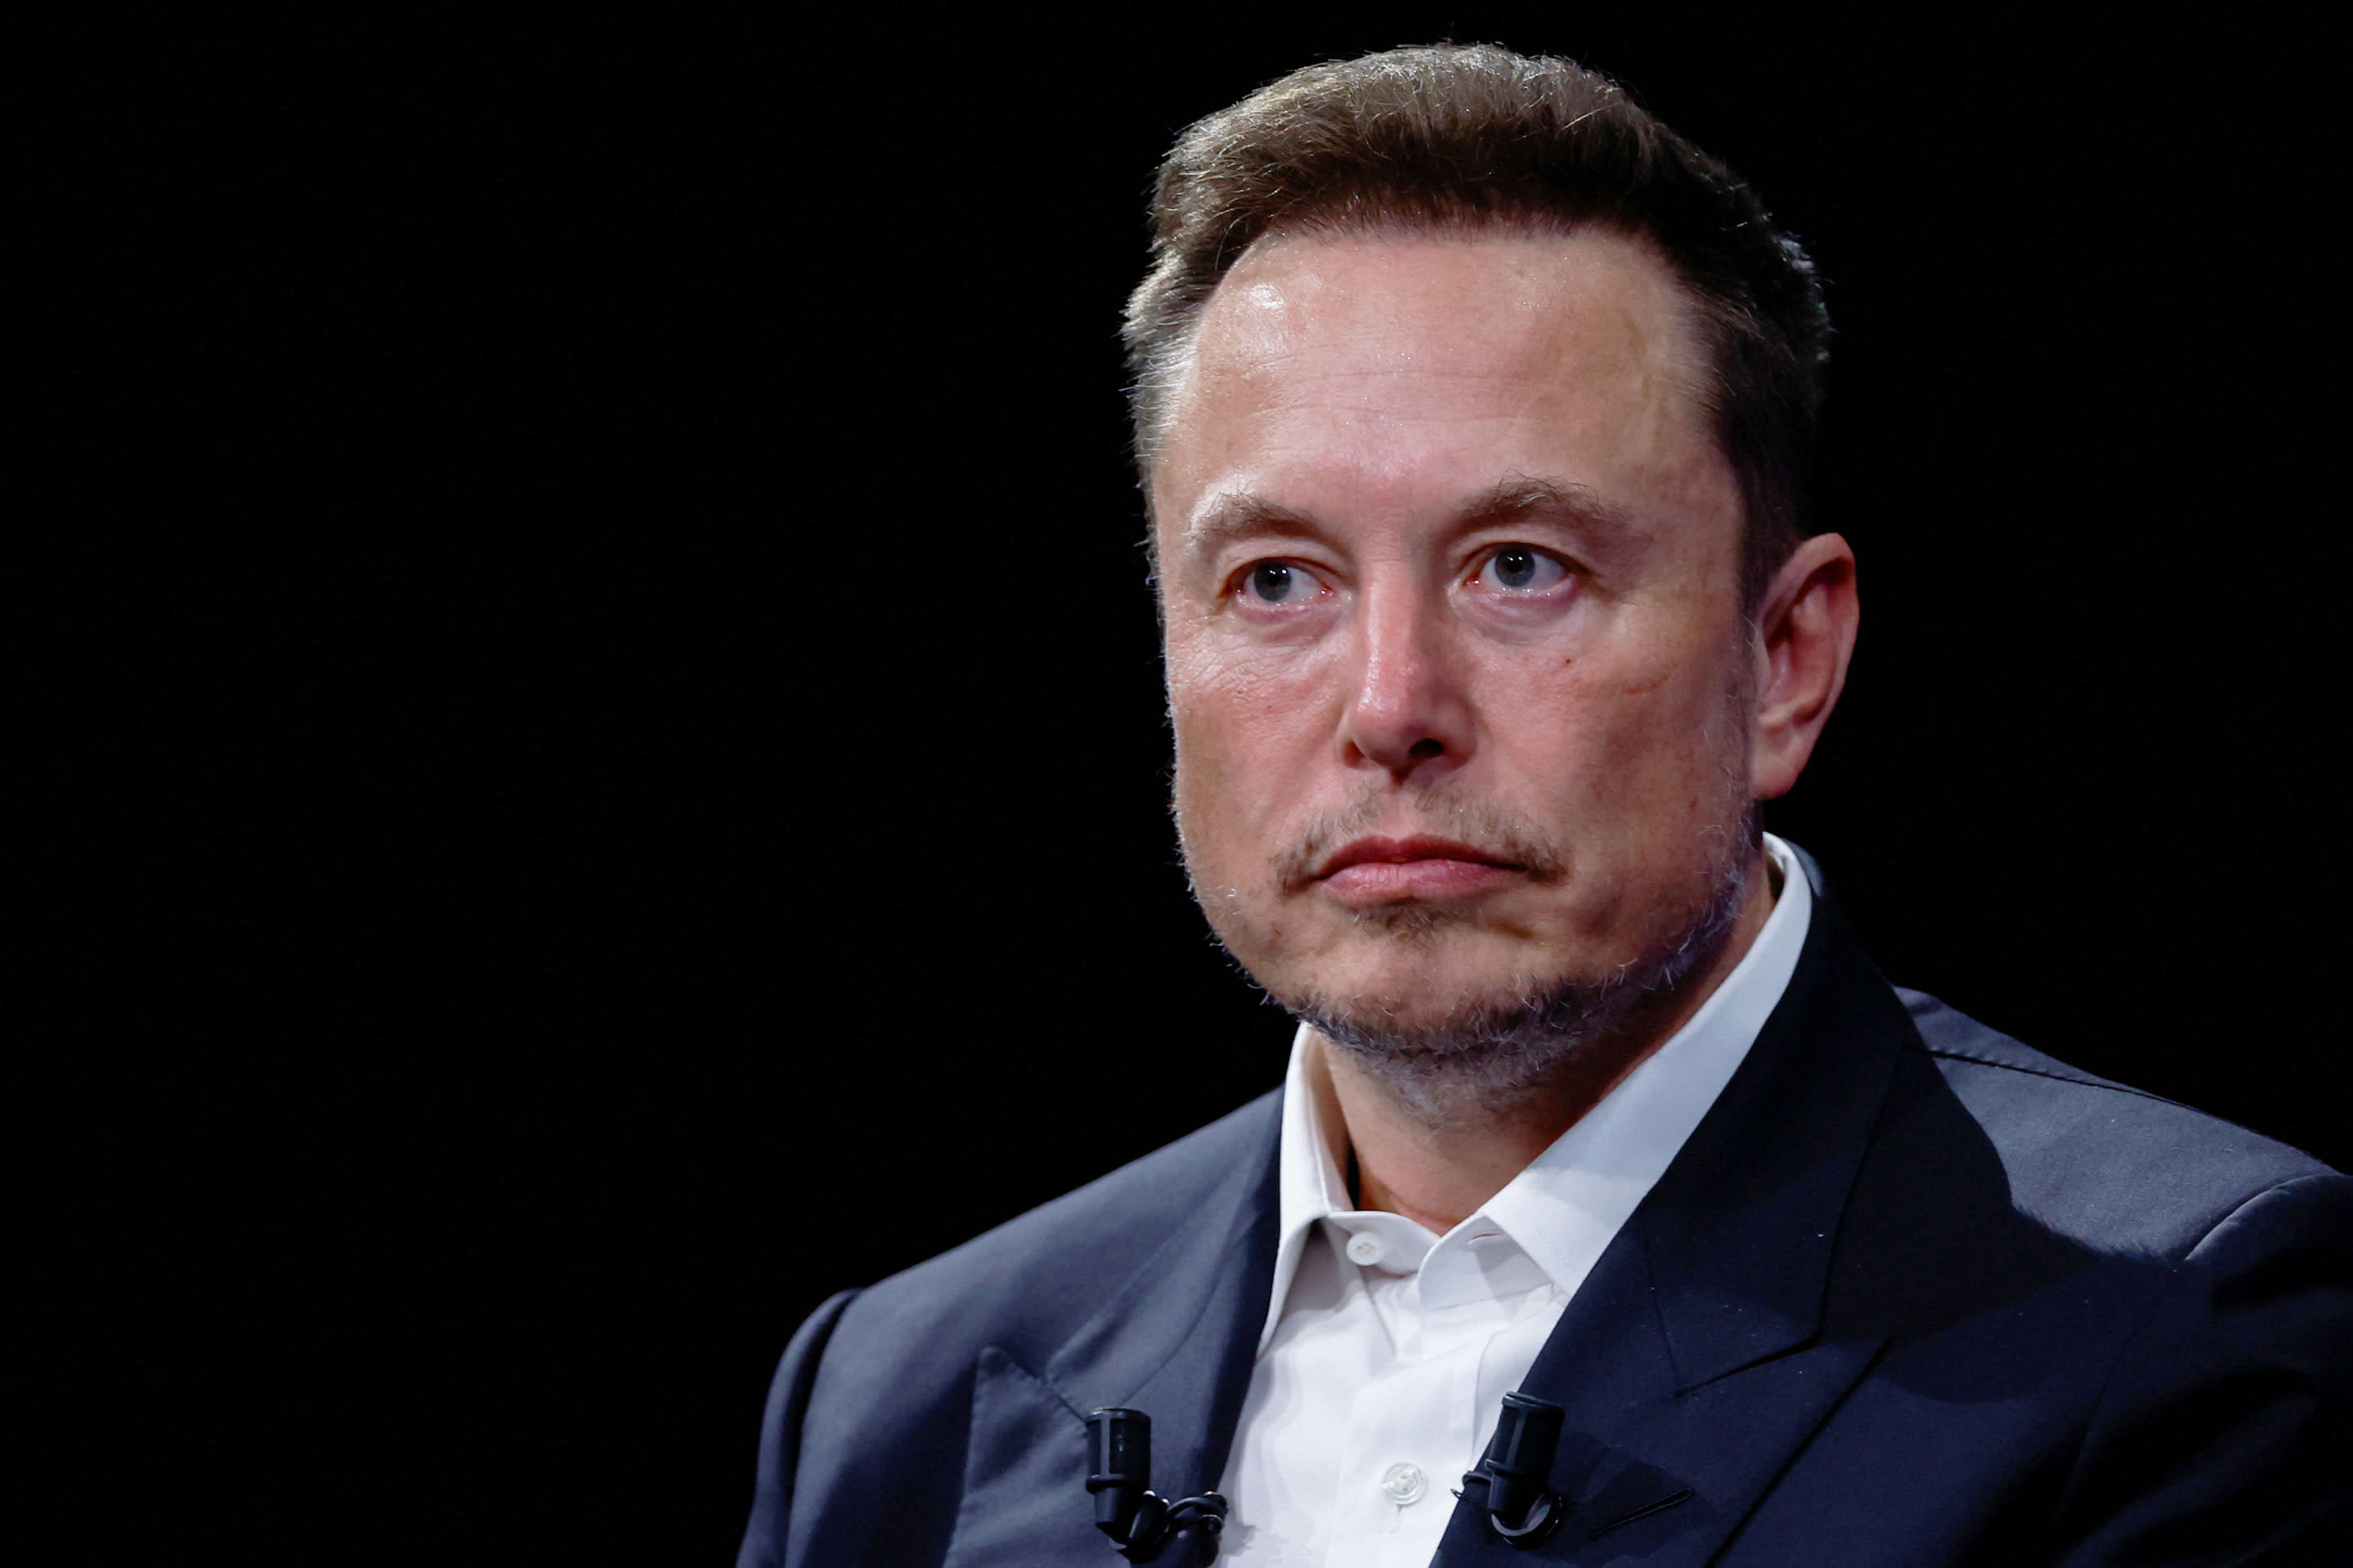 Tesla reportedly facing DOJ, SEC probes over plans to build Elon Musk a  large glass house